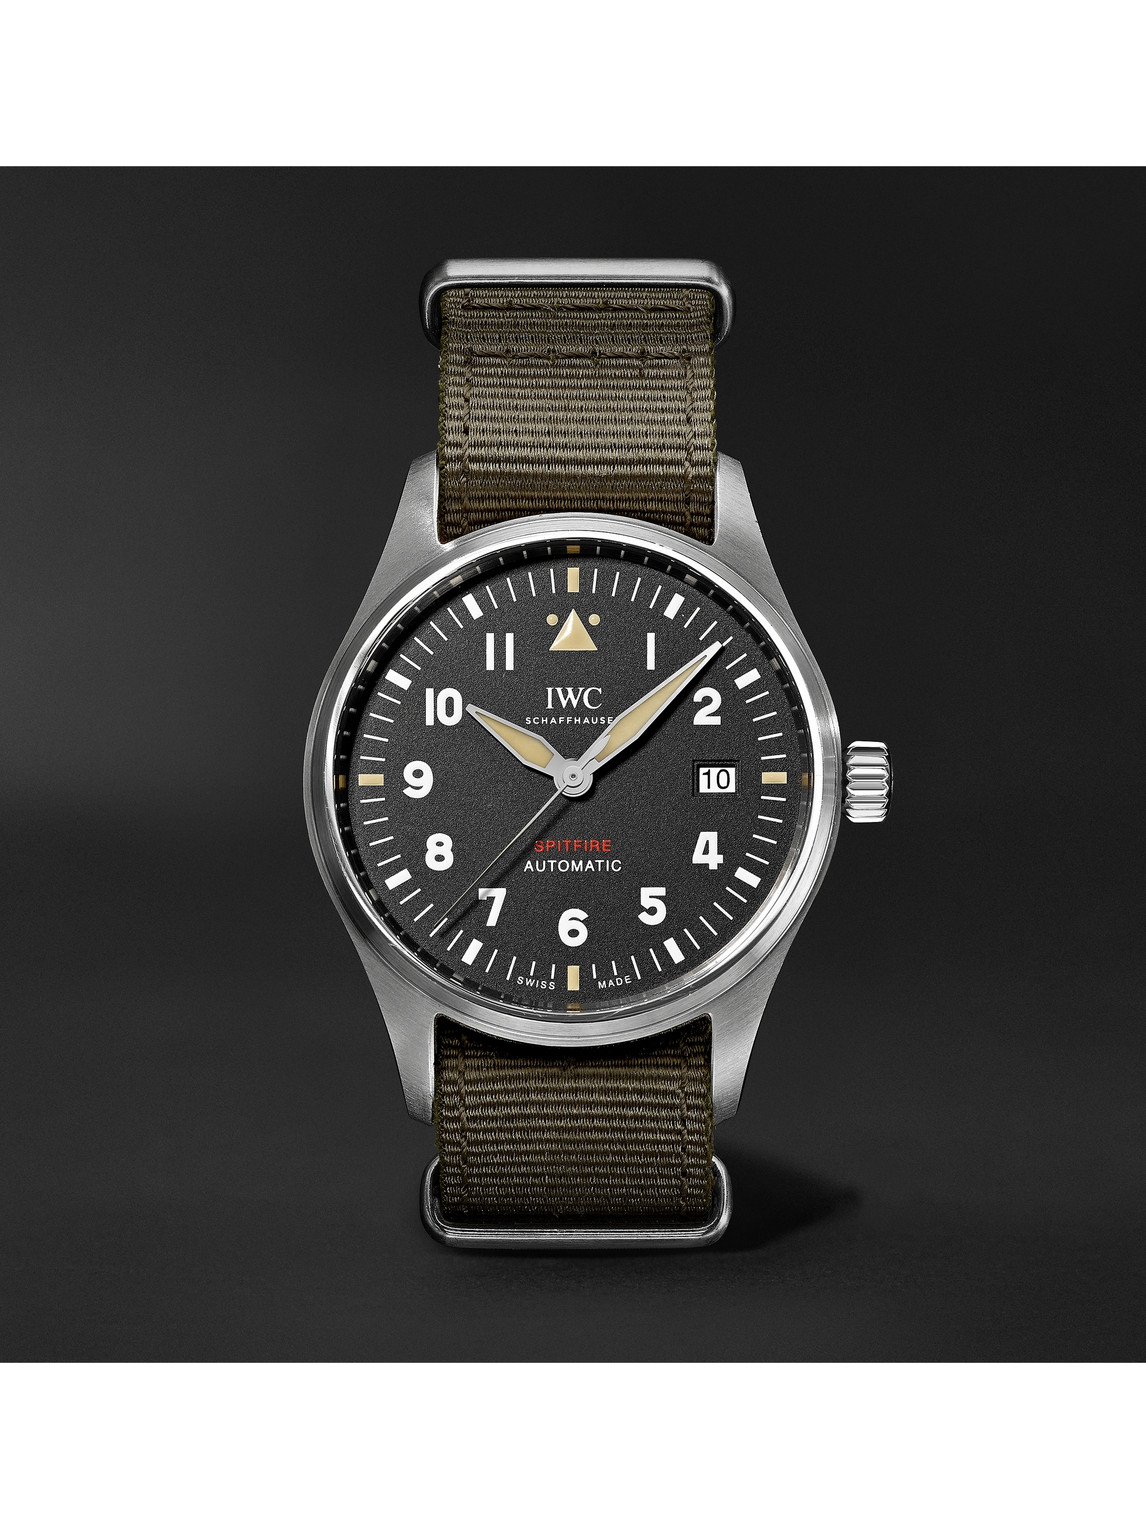 Pilot's Spitfire Automatic 39mm Stainless Steel and Textile Watch, Ref. No. IW326801